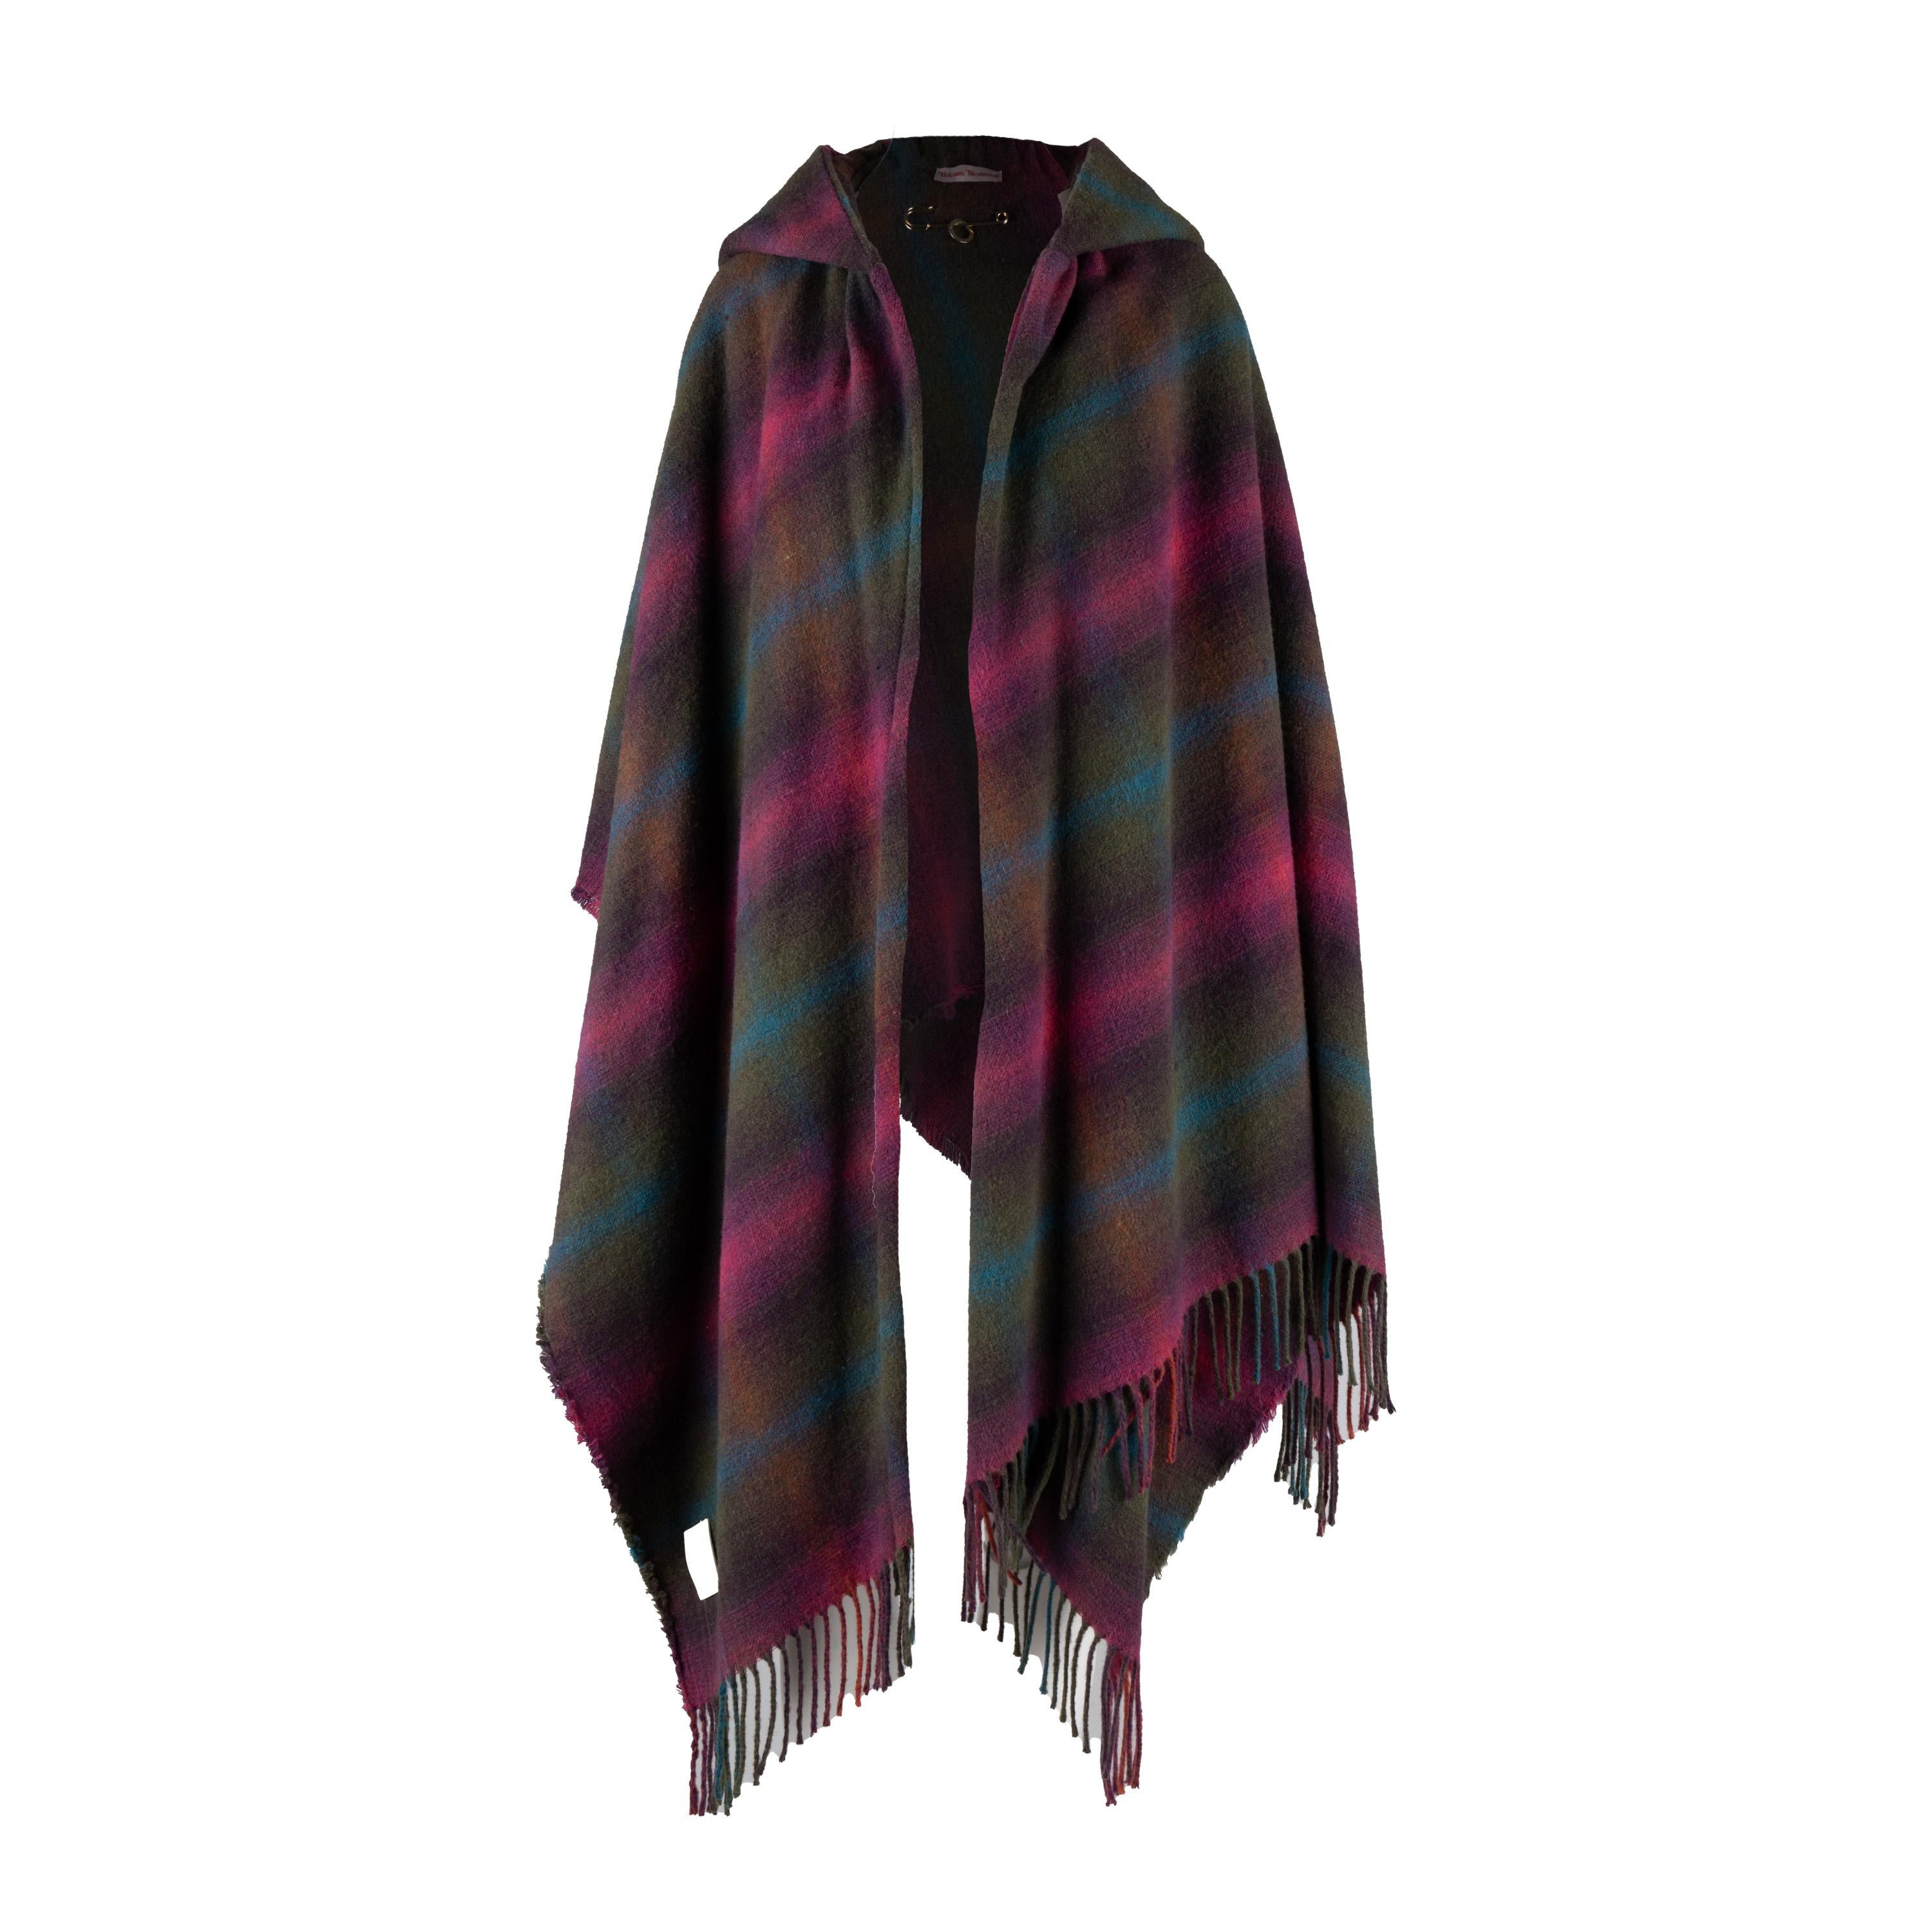 Step out in style with this double-layered, hooded Vivienne Westwood poncho. Crafted from a wool and acrylic blend fabric with a signature tartan plaid print, this poncho is finished off with a logo embossed pin to close the front and fringes at the